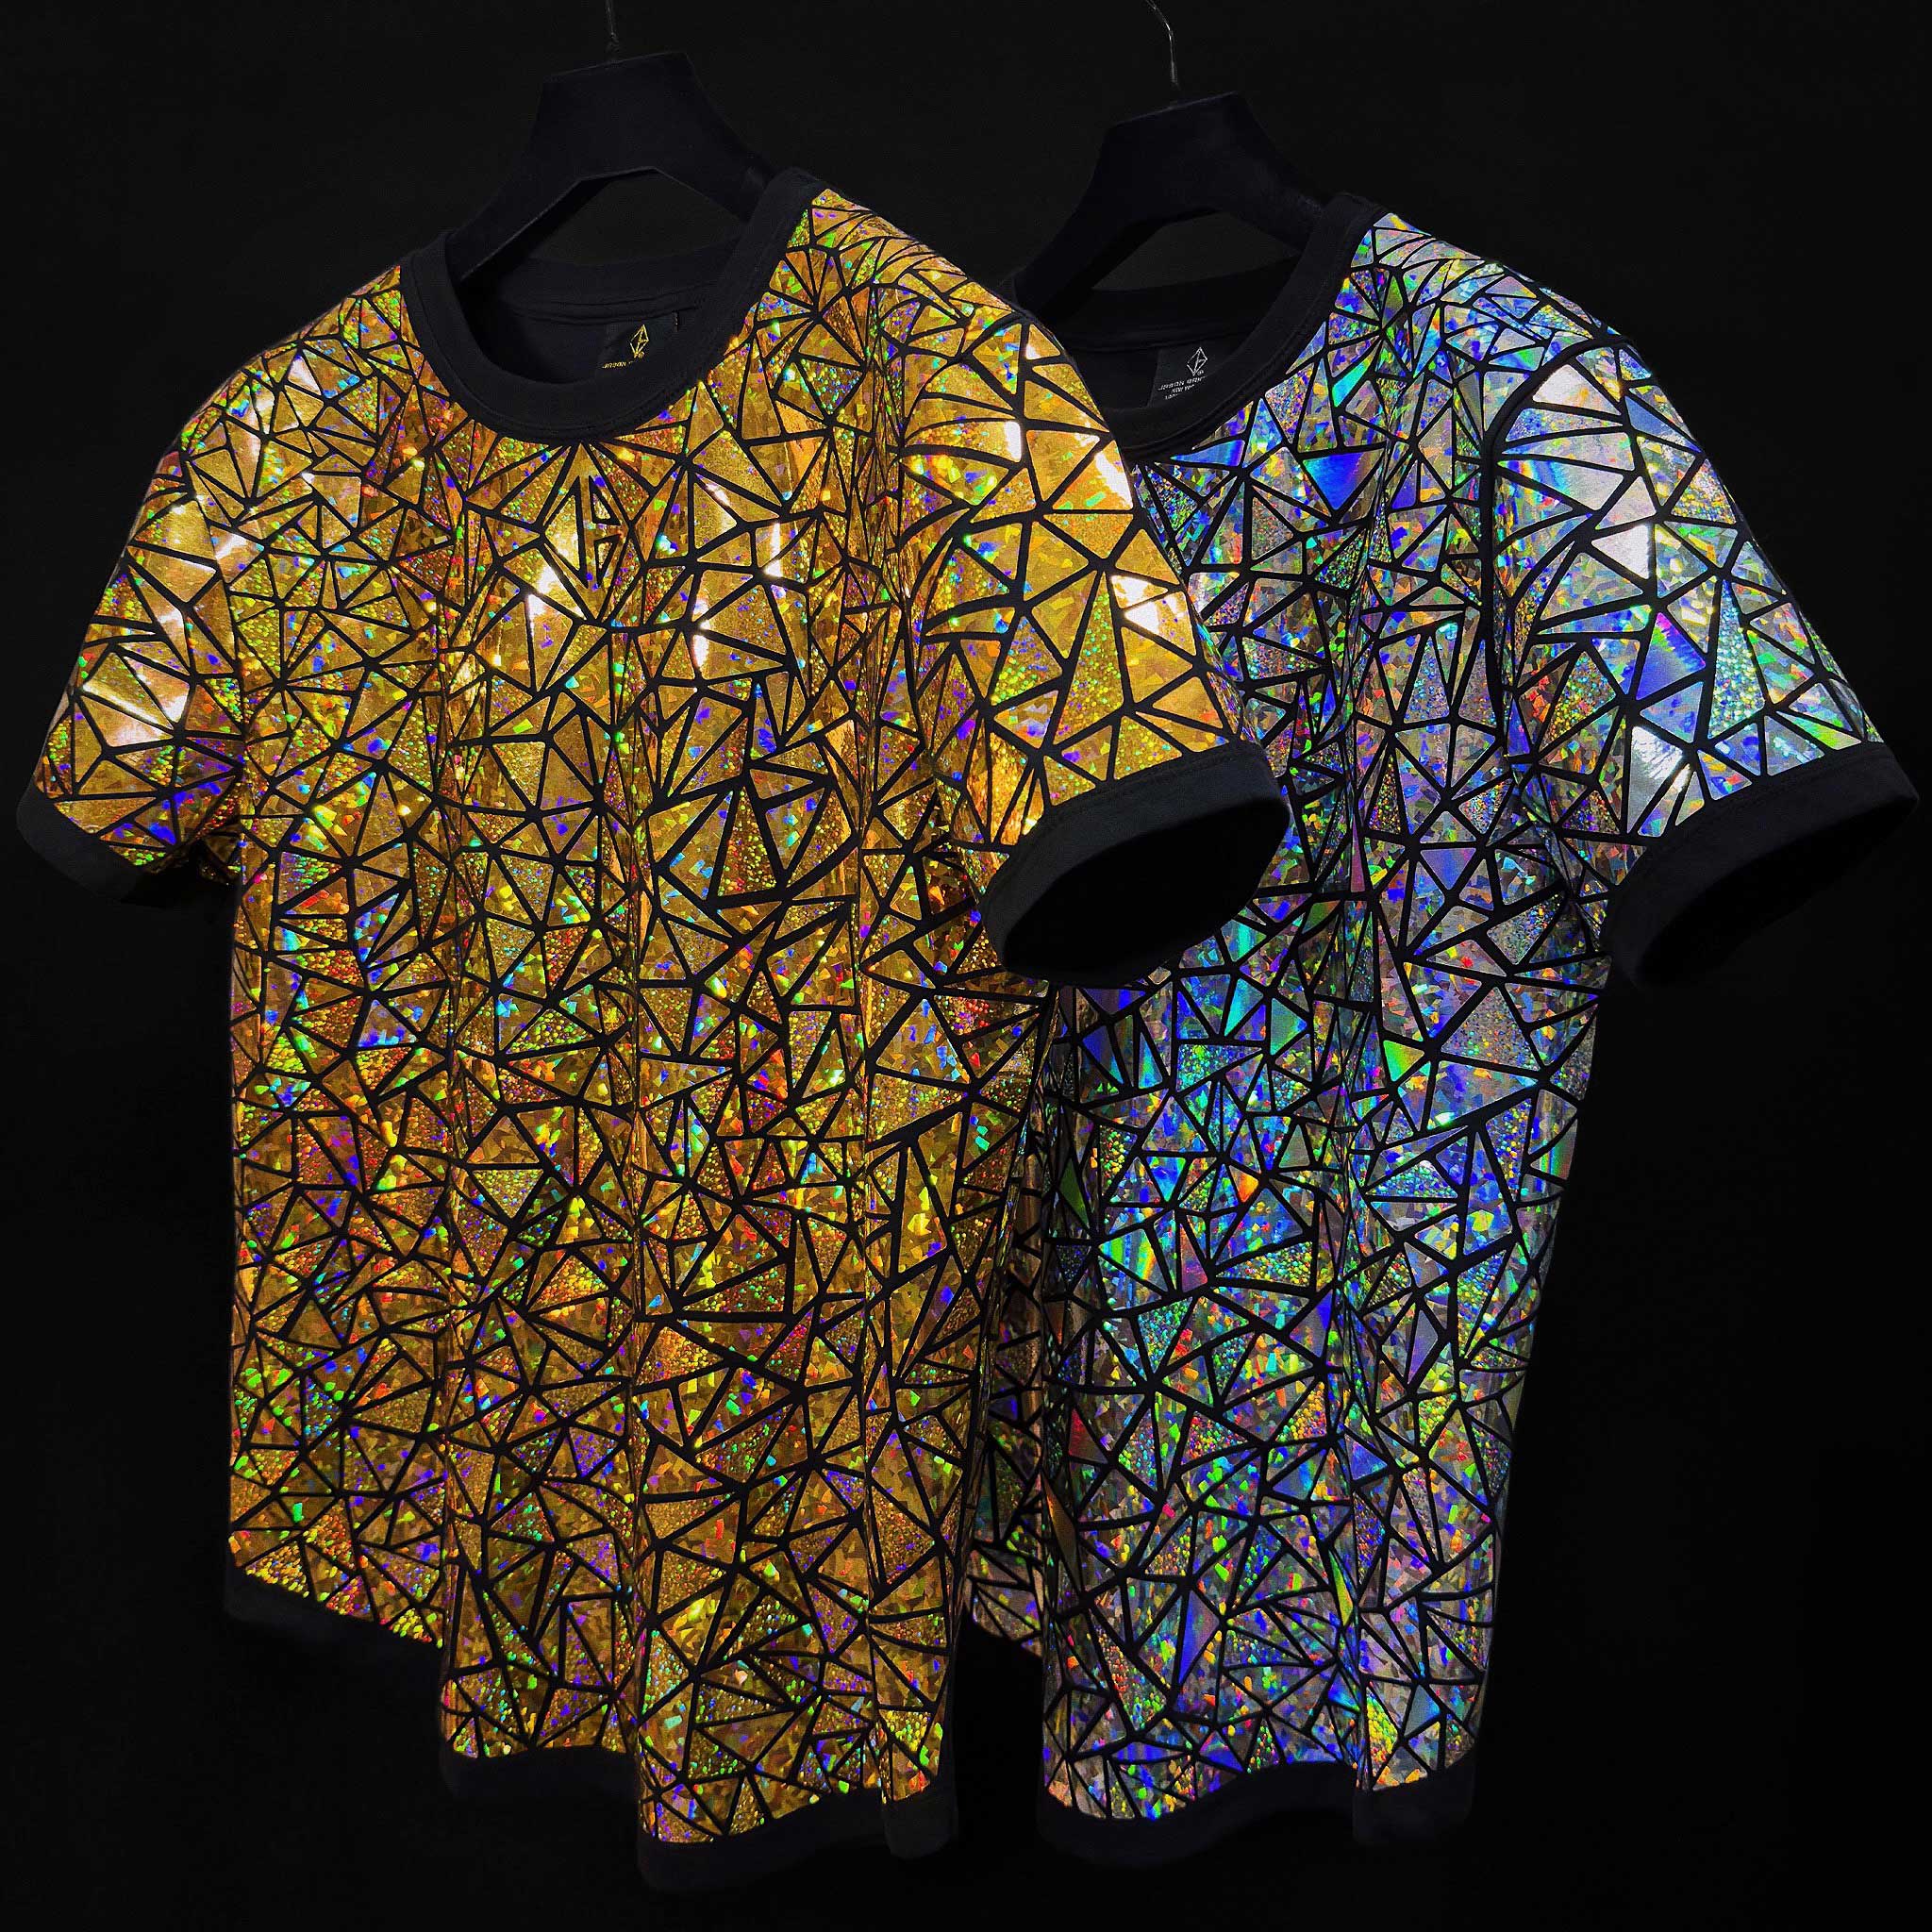 Holographic tops